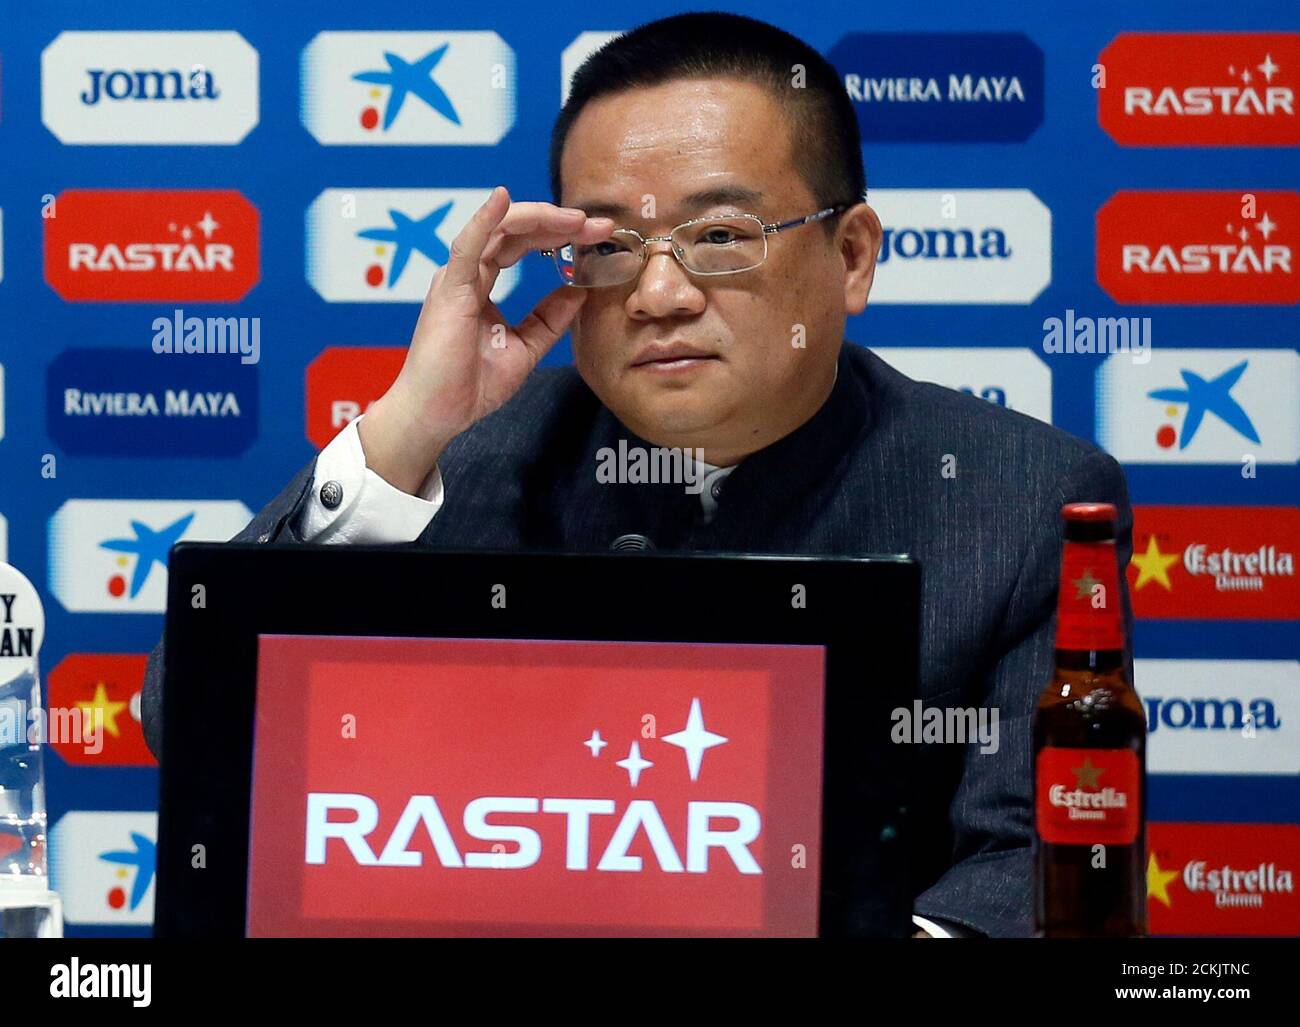 Rastar Group Chief Executive, Chen Yansheng gestures during a news  conference after becoming the main shareholder and new president of RCD  Espanyol soccer club, near Barcelona, Spain, January 21, 2016.  REUTERS/Albert Gea